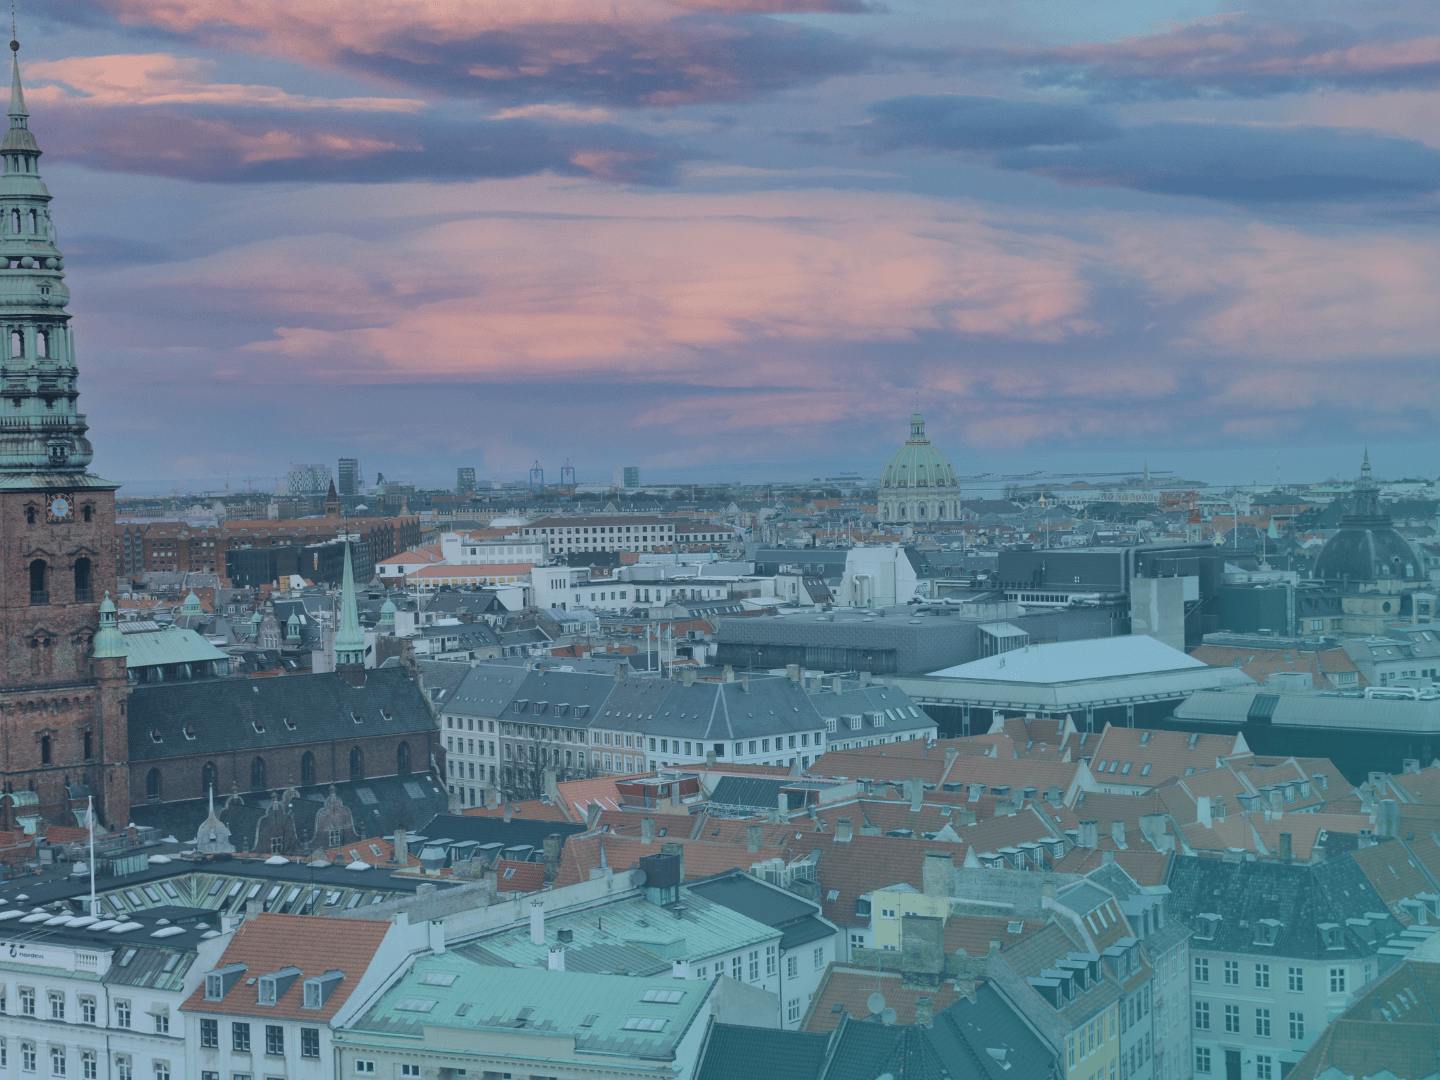 A view of a city in Denmark from the top. Old, stylish buildings are surrounding the city.